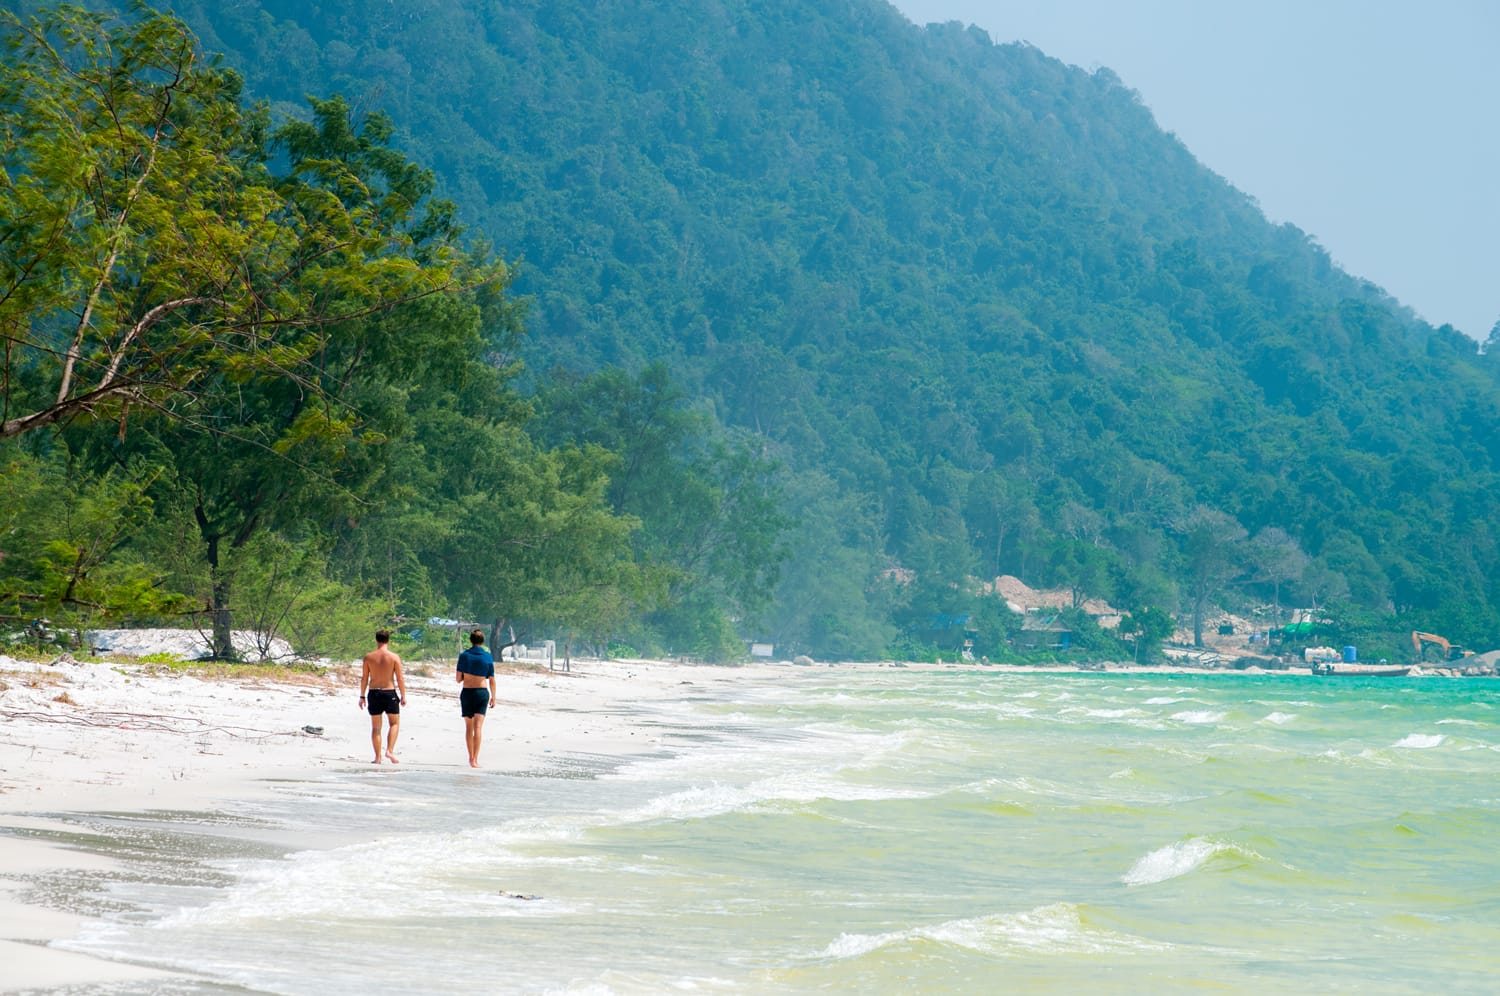 Long Beach is one of the most beautiful beaches in Koh Rong island, Sihanoukville, Cambodia.